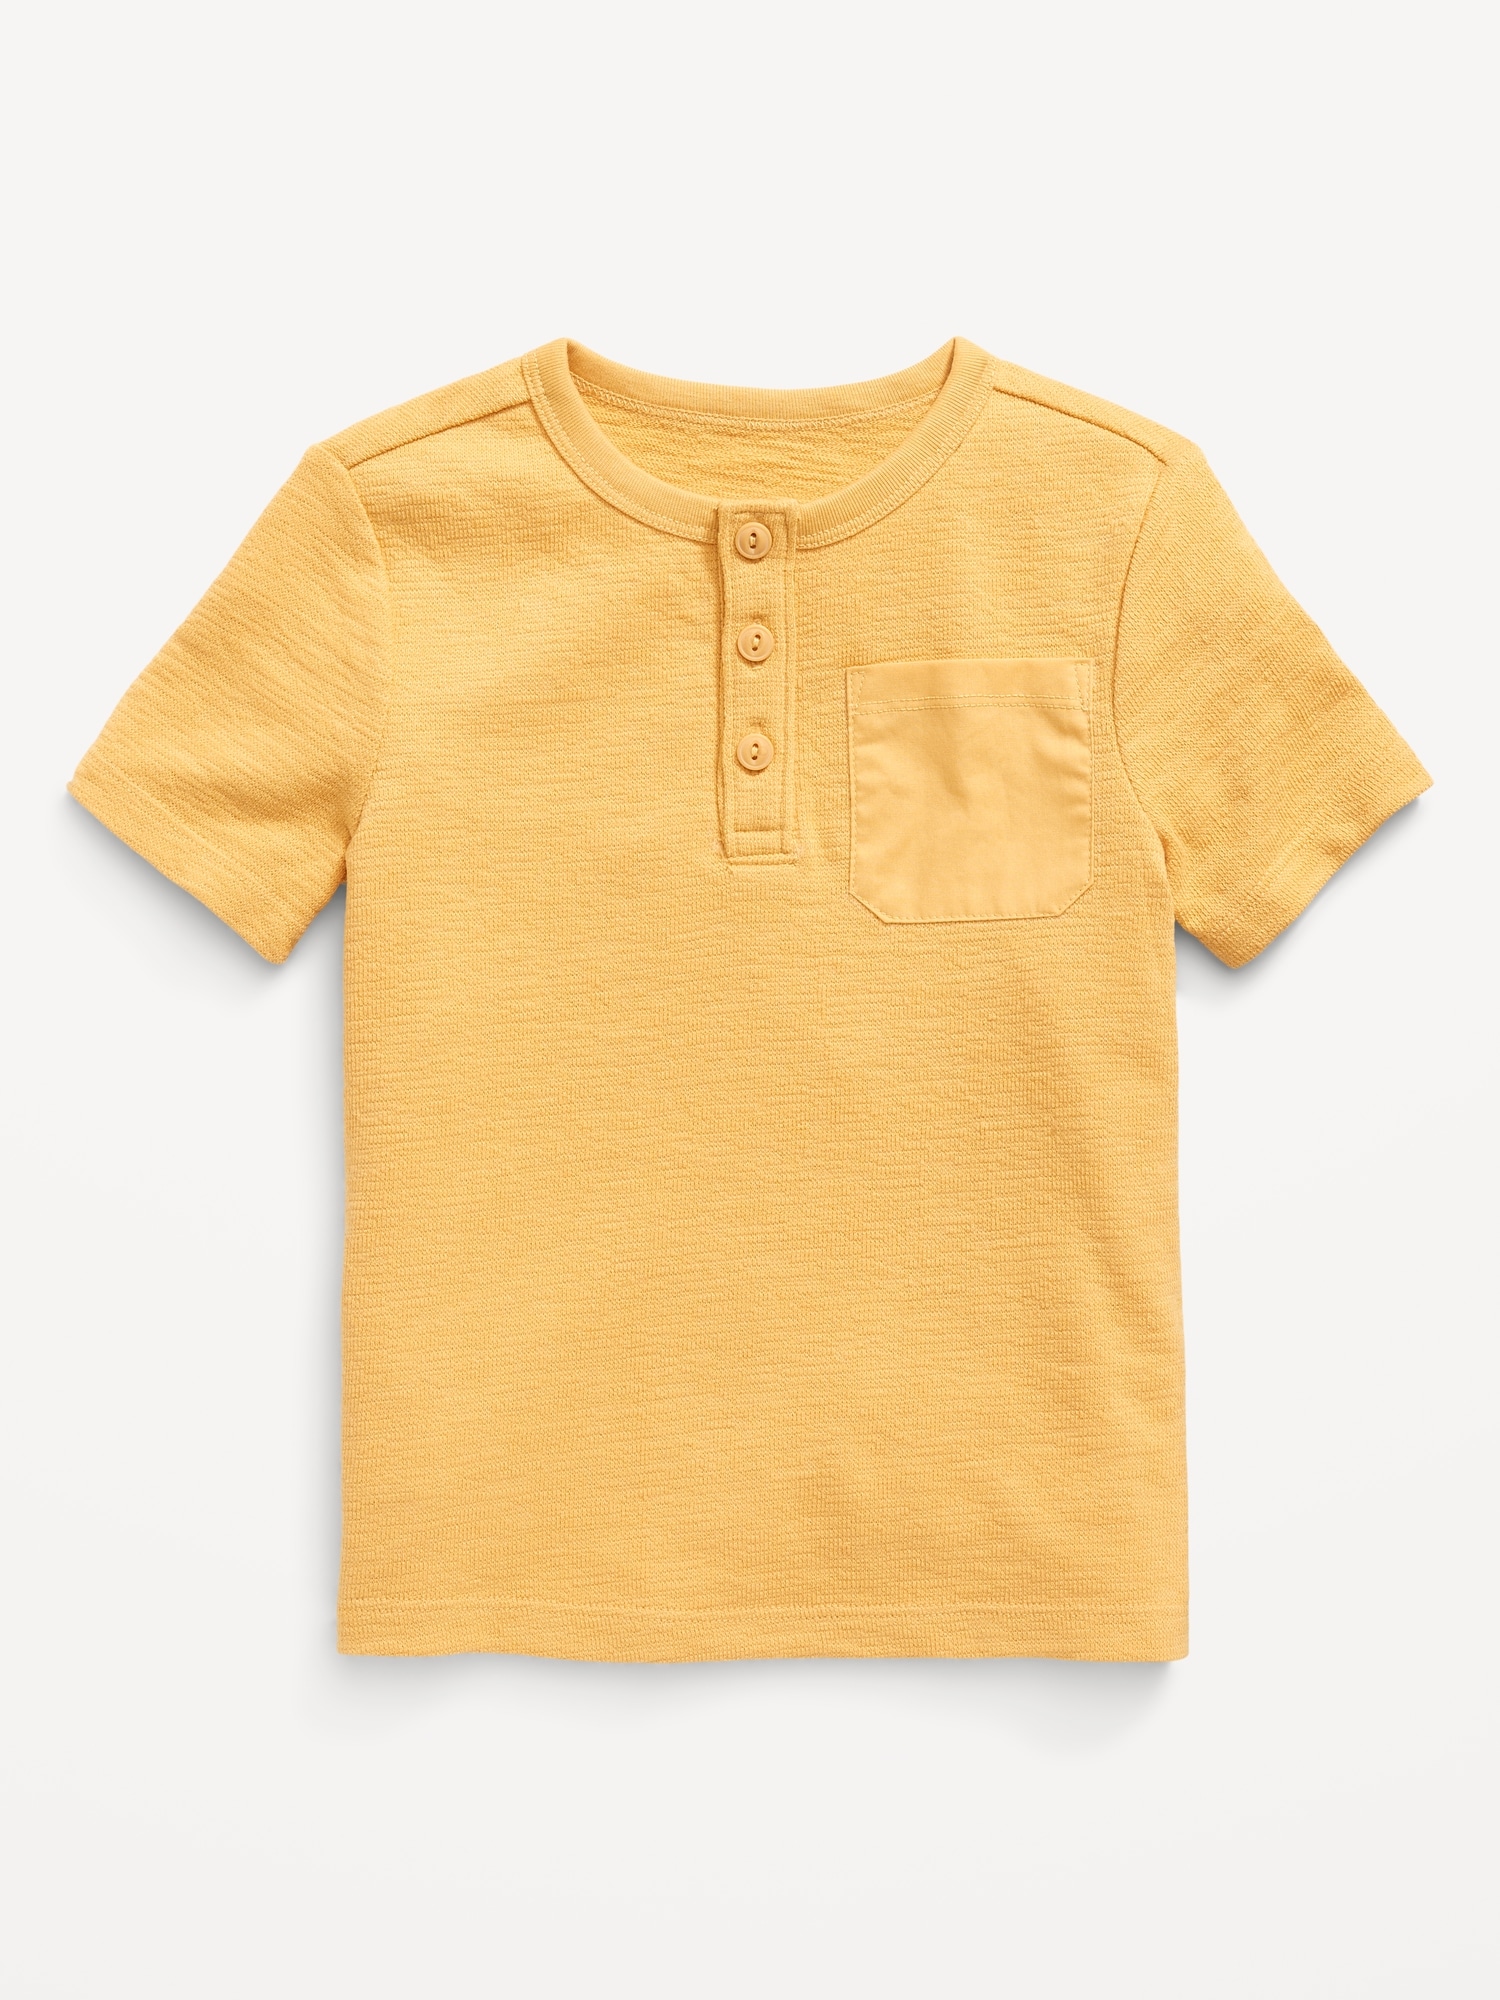 Old Navy Jacquard-Knit Henley Pocket T-Shirt for Toddler Boys yellow. 1